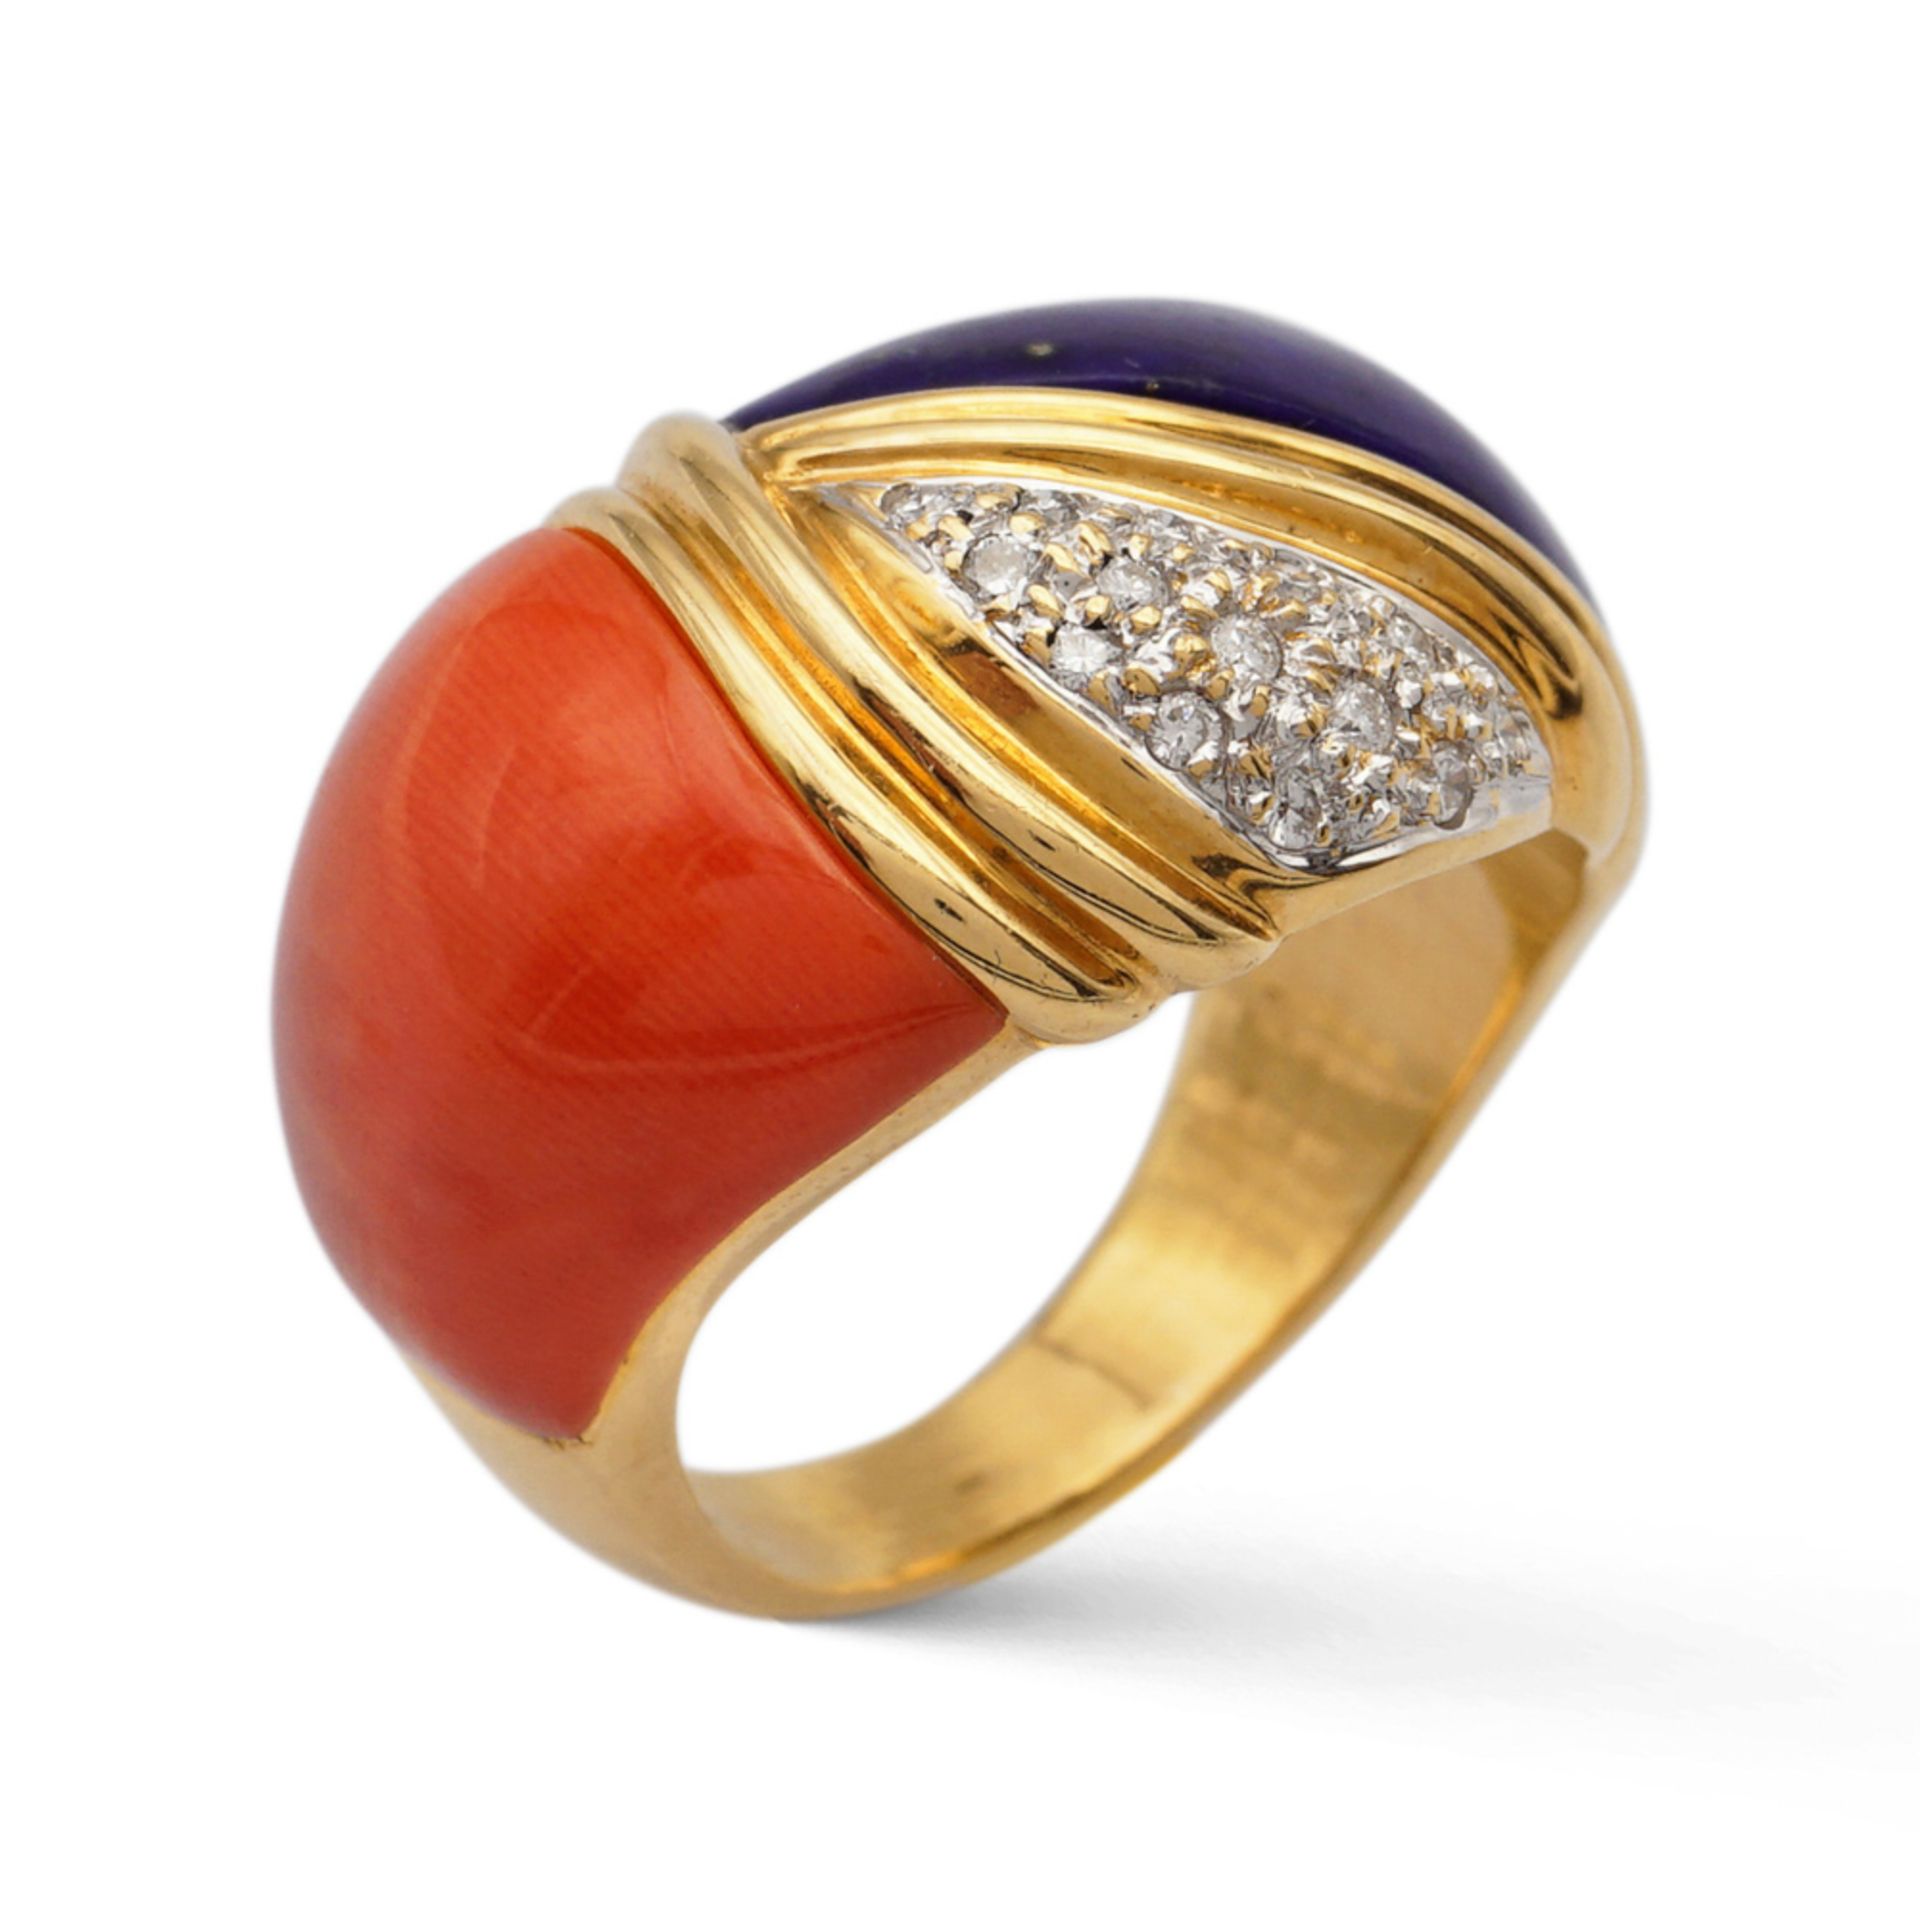 18kt yellow gold, coral, blue enamel and diamond ring 1970/80s weight 11,4 gr.